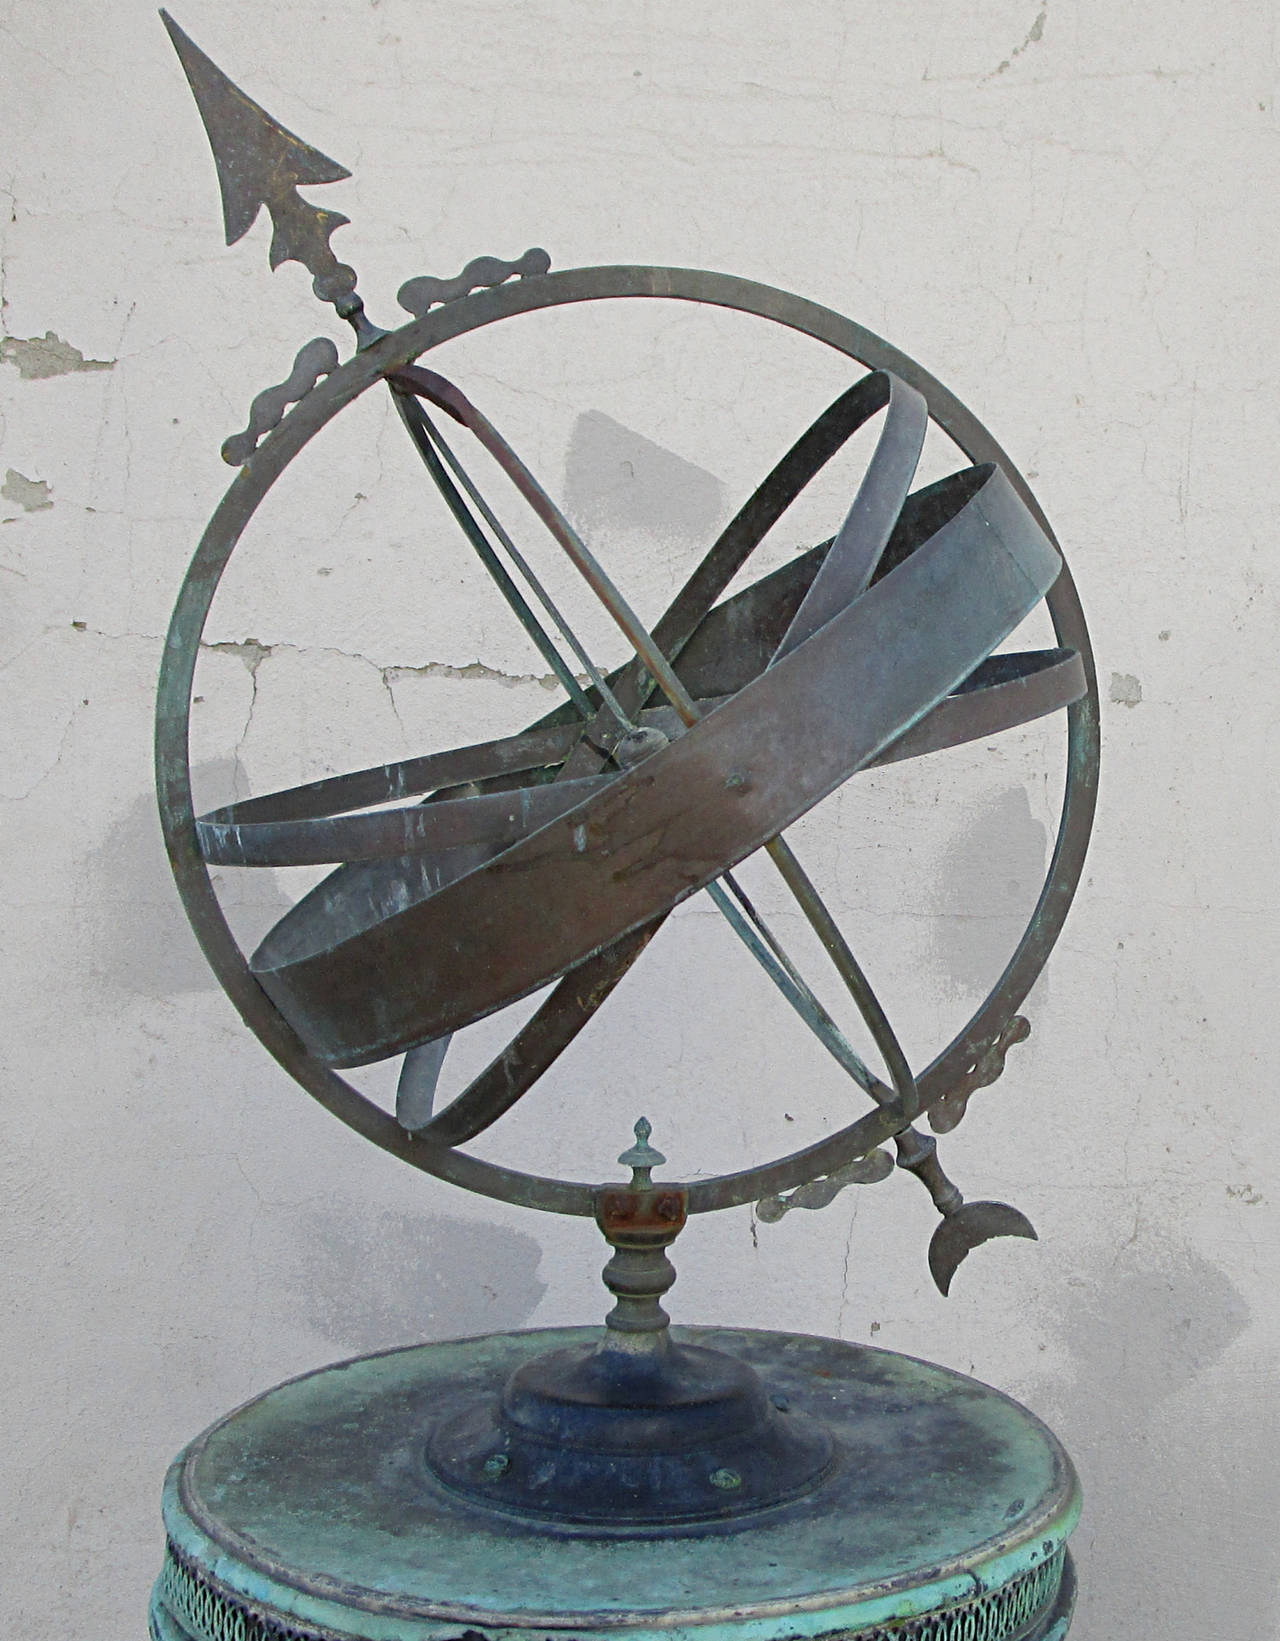 Simple and elegant this 19th century armillary has beautiful rich patina in hues of green and charcoal with hints of burnt orange. The base is marked Whyte & Co Glasgow. Retains an original inscription plaque.